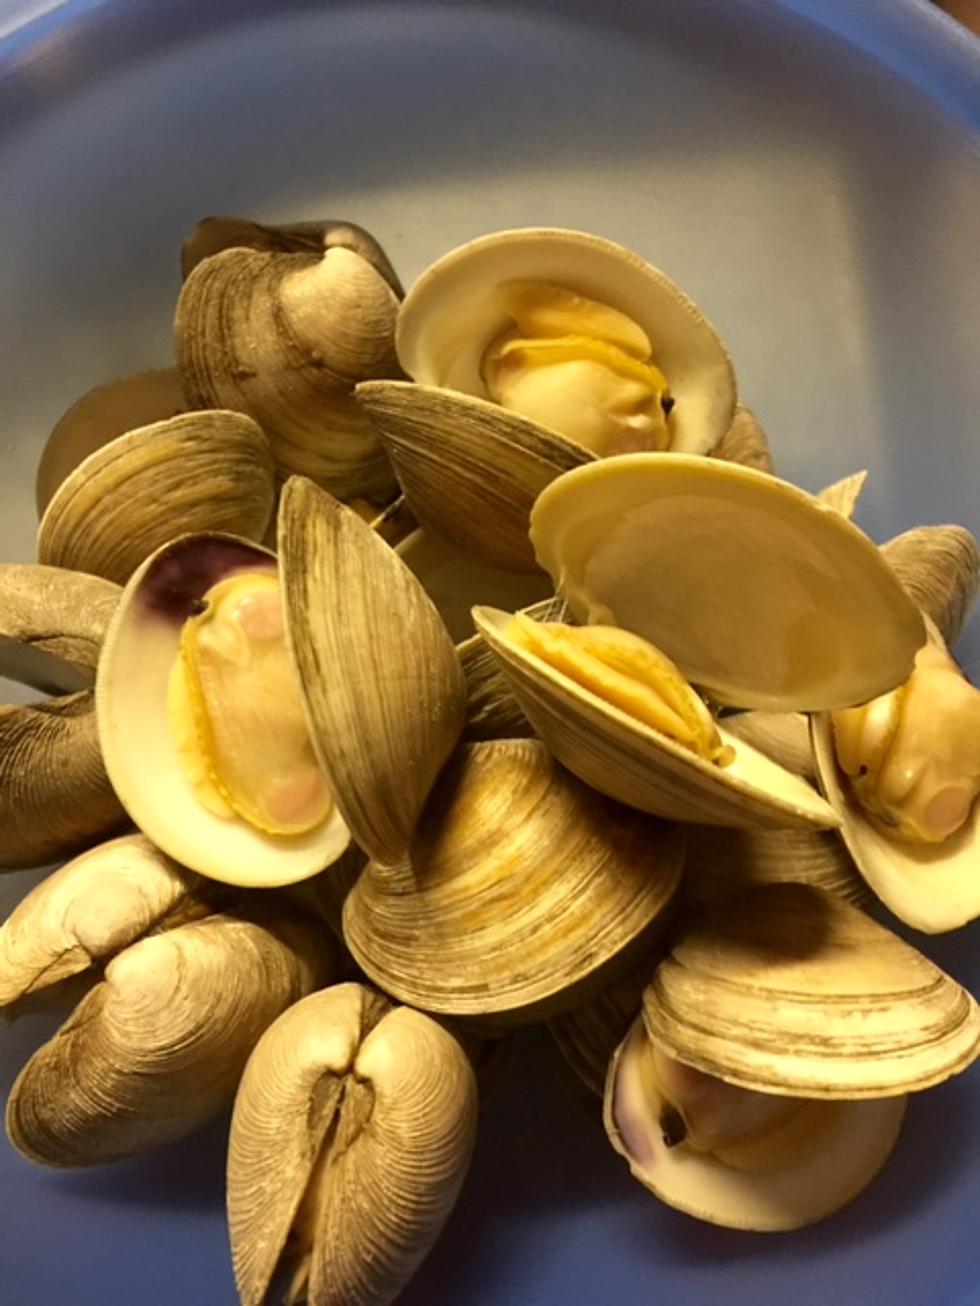 Love Clams? Go To Rhode Island This Week